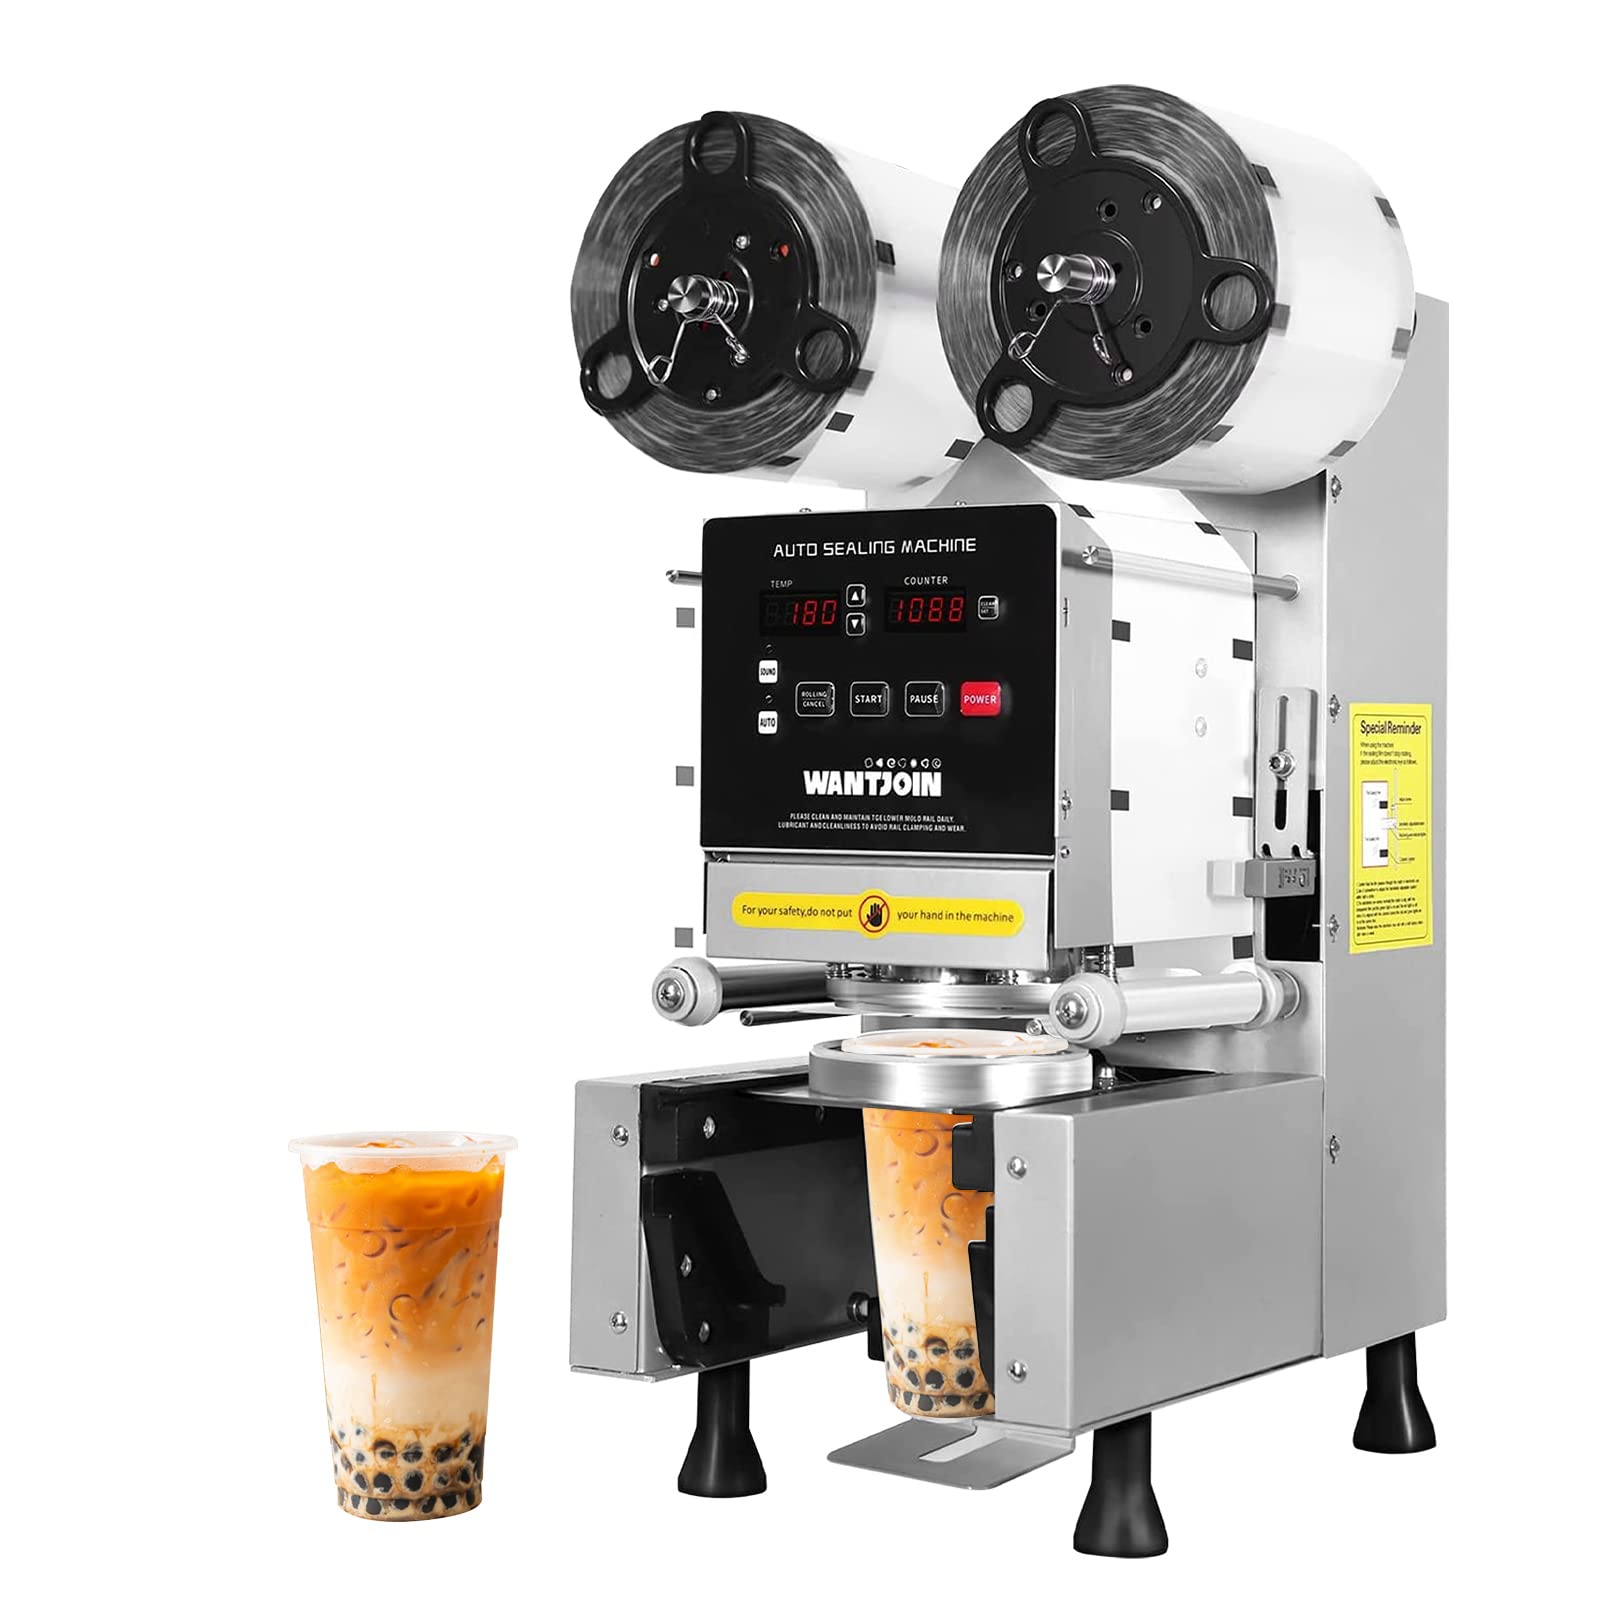 WantJoin Cup Sealing Machine Full Automatic Cup Sealer Machine 90/95mm 35.4/37.4in Electric Cup Sealing Machine 500-650 Cups/H Digital Control LCD Panel Cup Sealer for Bubble Milk Tea Coffee Grey…